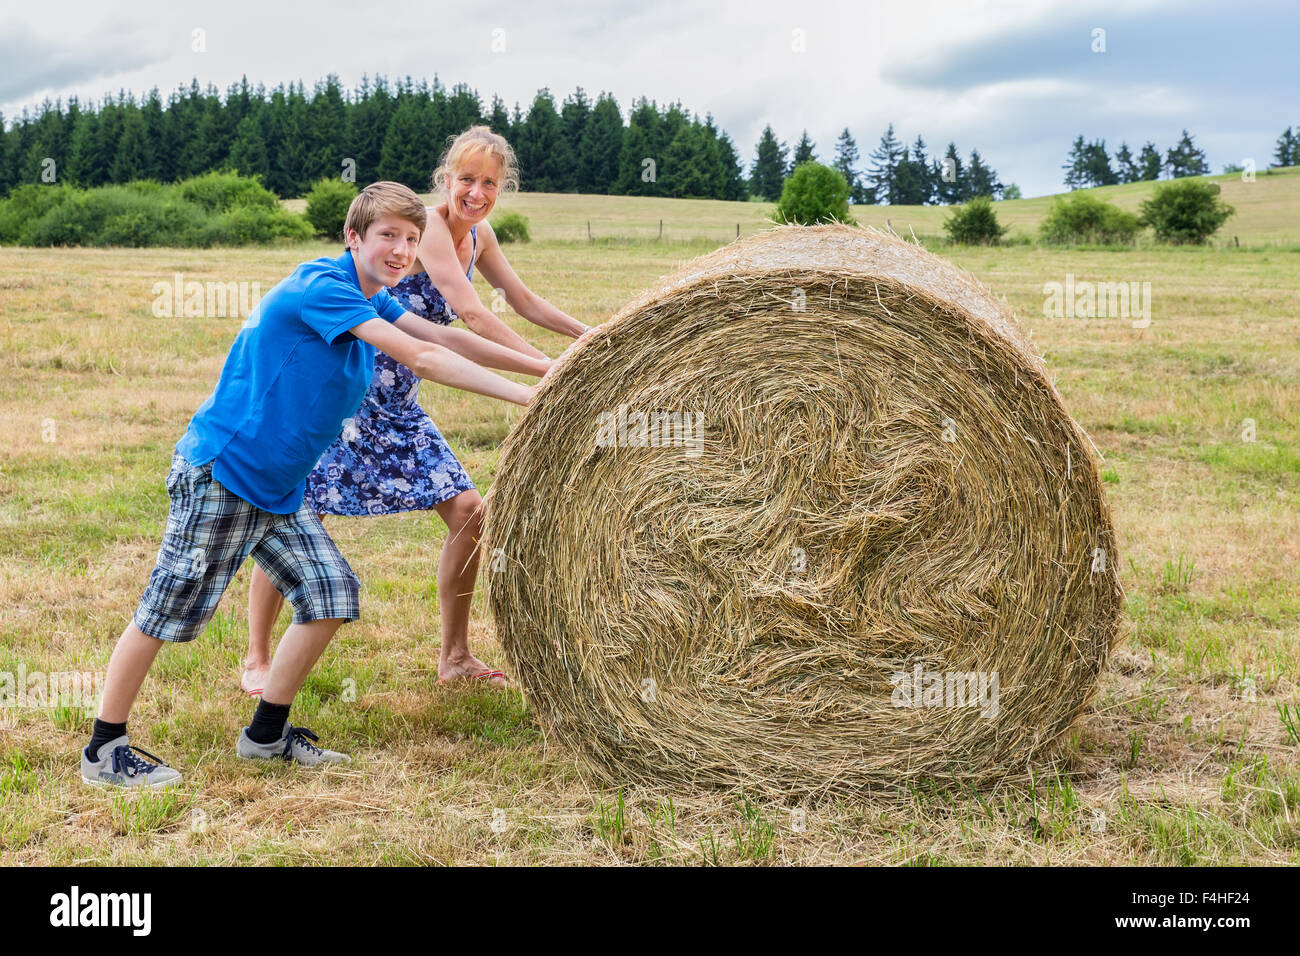 Woman and teenage boy  rolling hay bale on grass in rural area Stock Photo